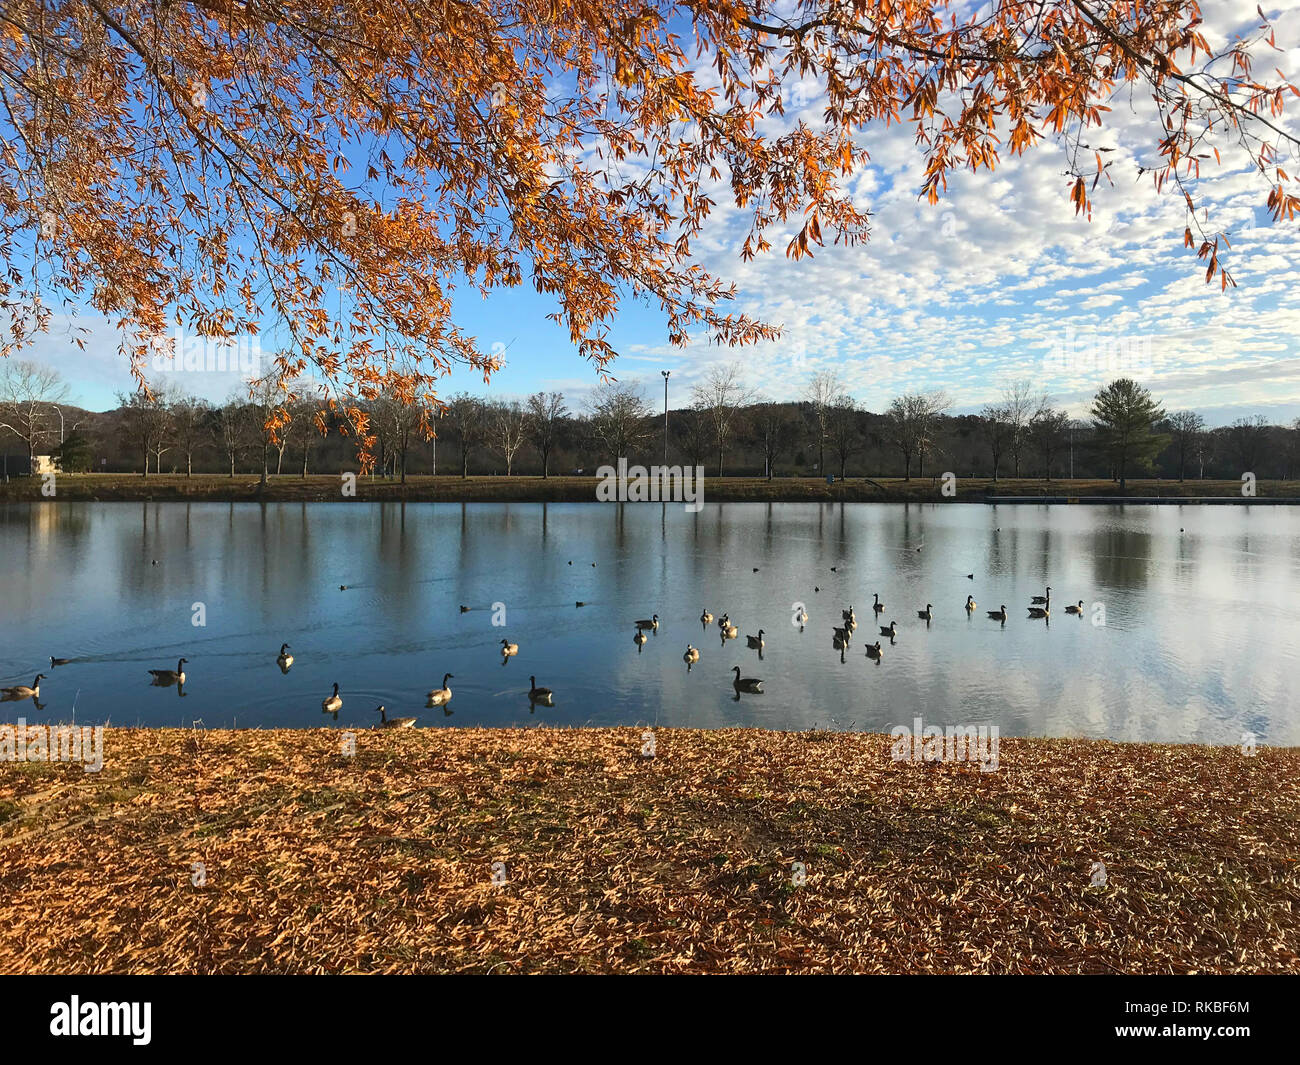 View of the marina and rowing club area at Oak Ridge Marina in Oak Ridge, Tennessee, USA, with Canada Geese and autumn foliage. Stock Photo